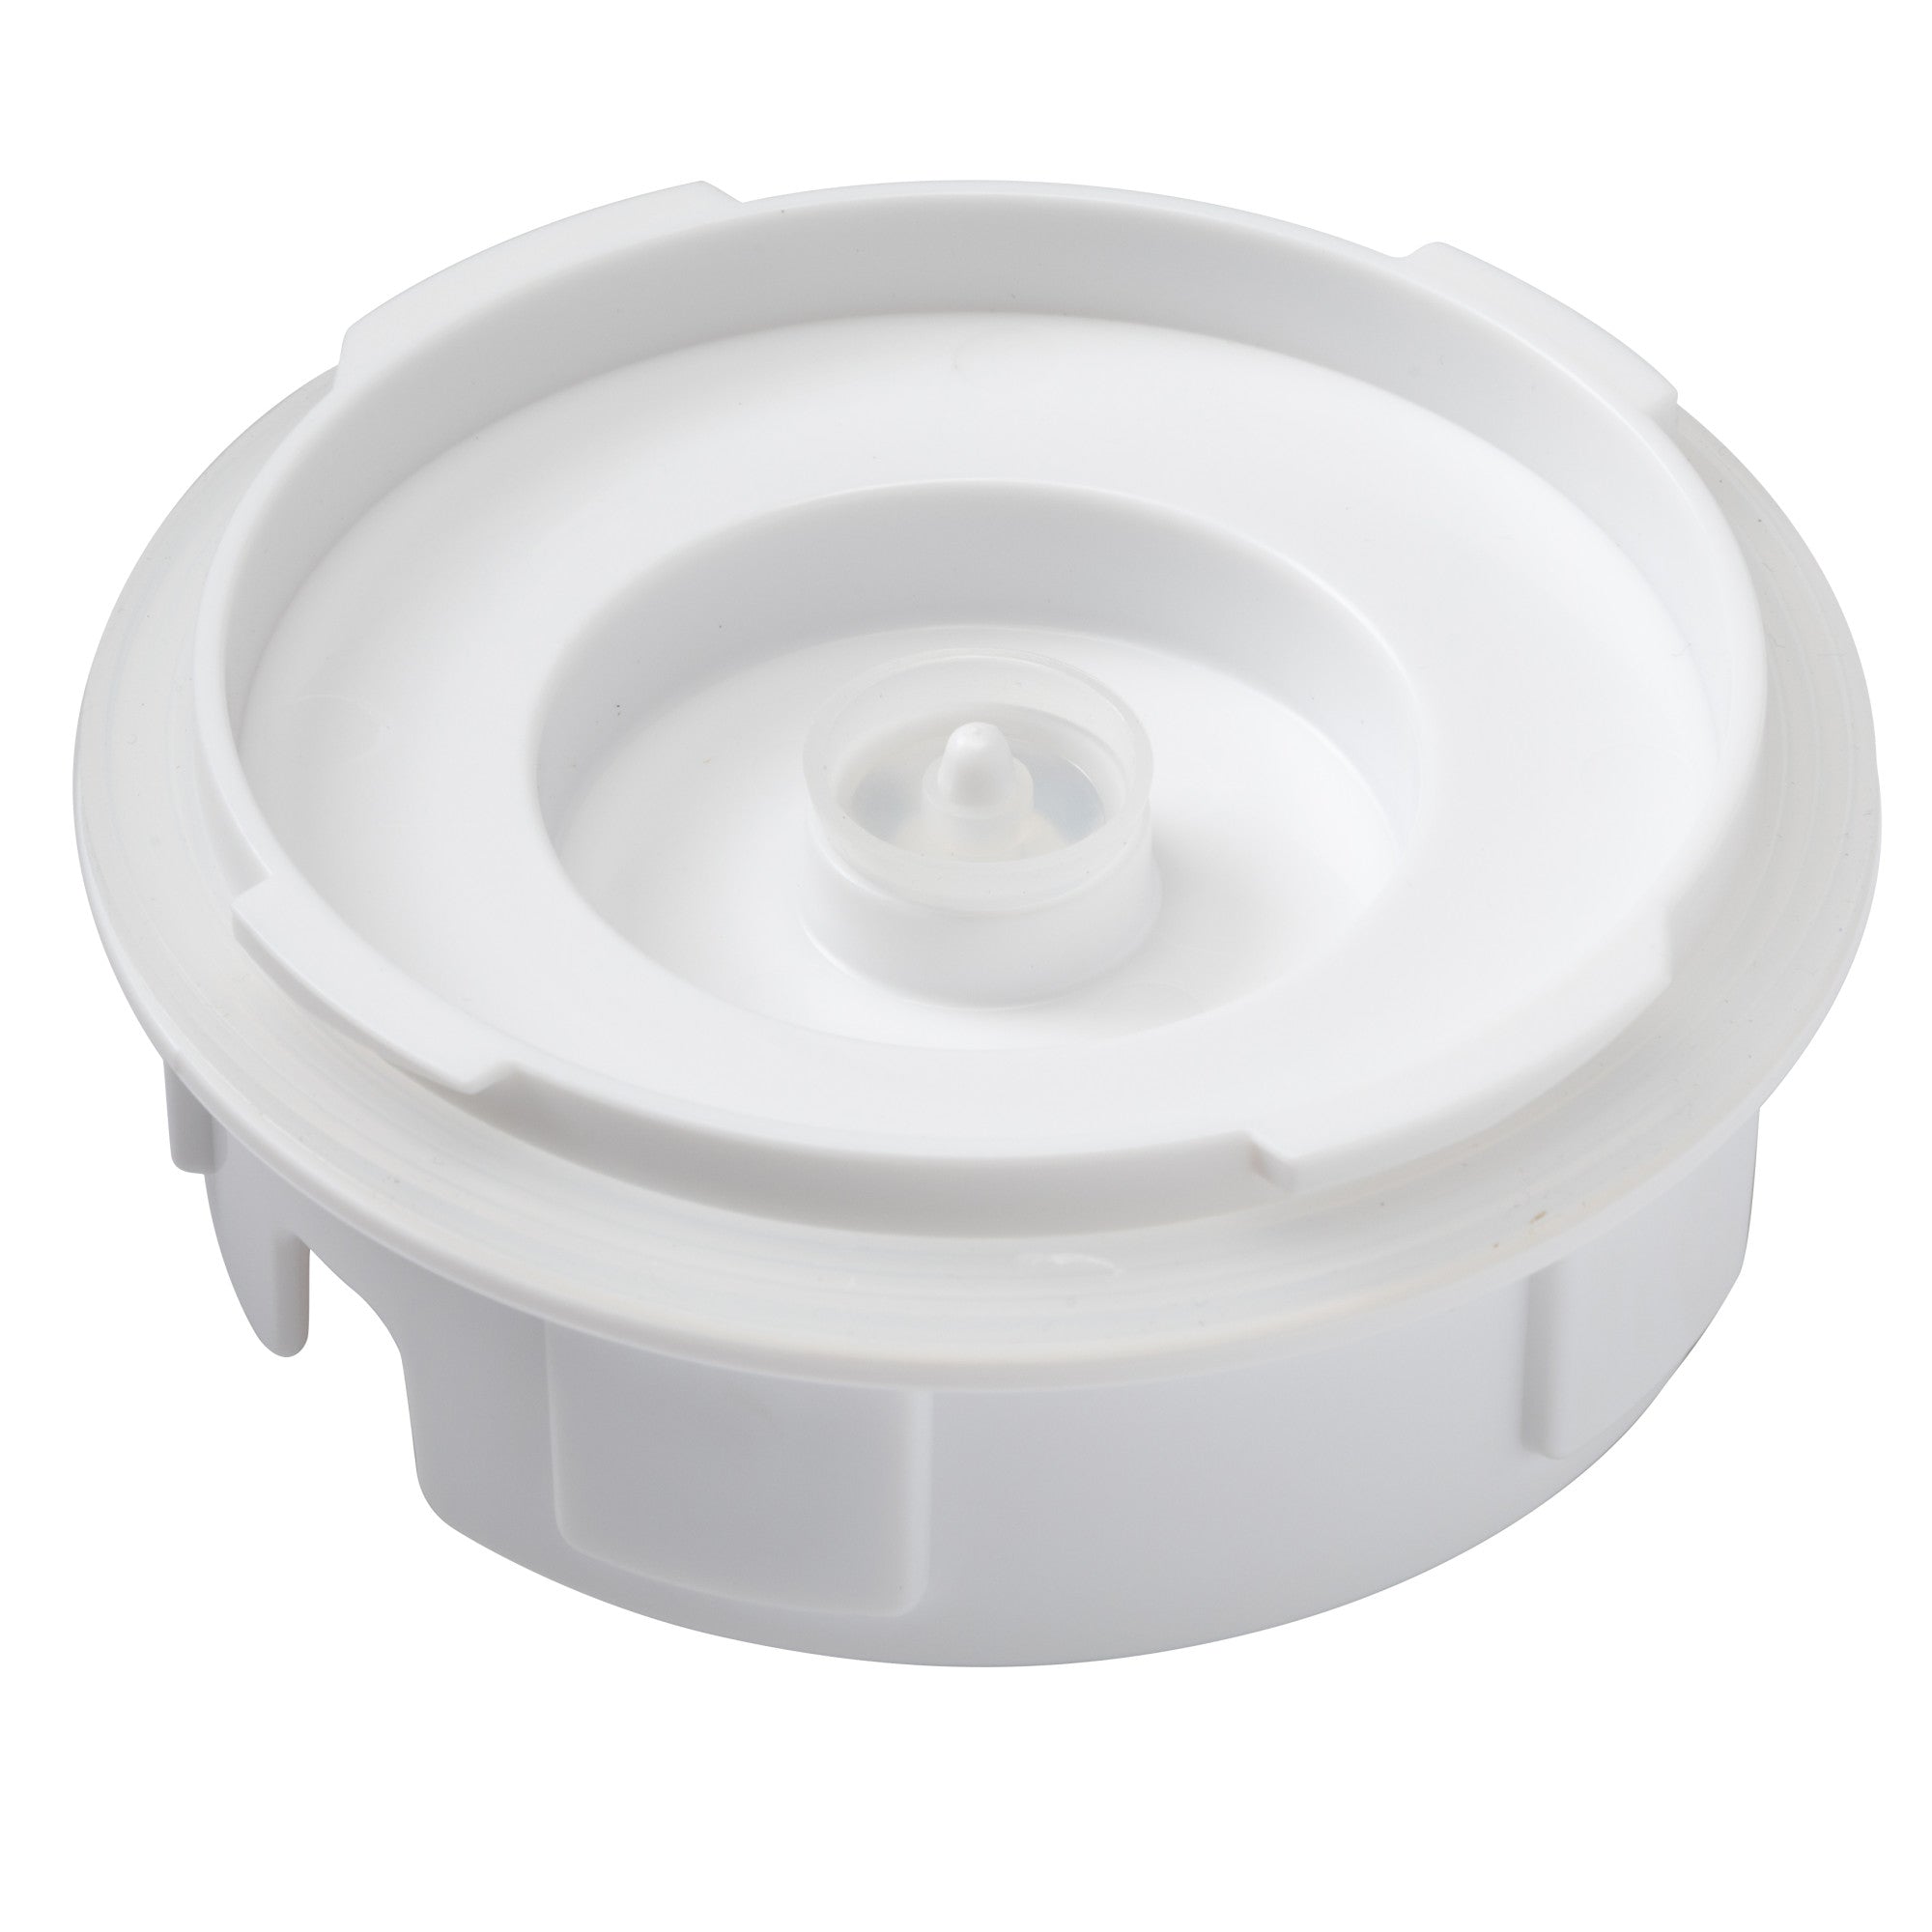 Stay Clean Humidifier Replacement Tank Cap - White